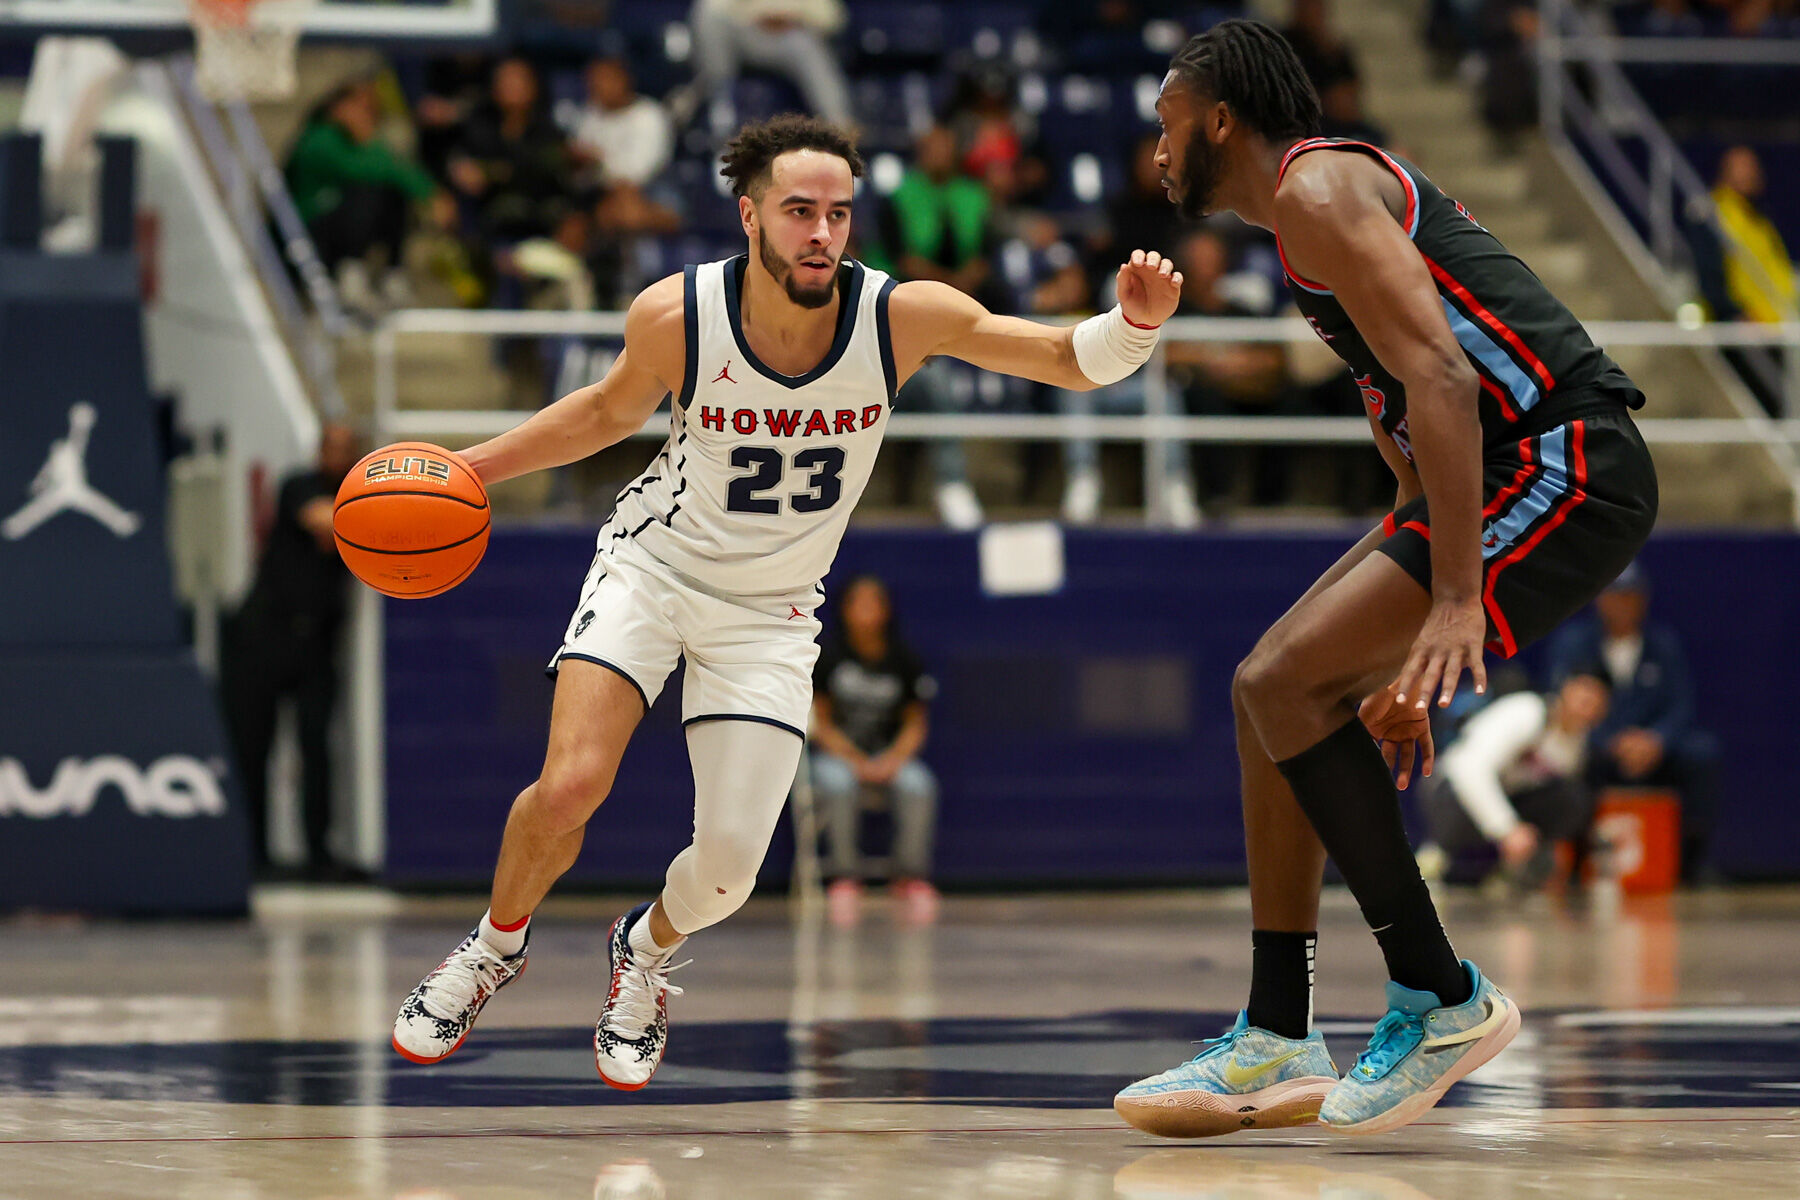 <h3>Howard Bison</h3>
<p>The Howard Bison are back in the tournament for the second straight year after <a href="https://wtop.com/ncaa-basketball/2024/03/howard-downs-delaware-state-70-67-for-meac-crown-and-2nd-consecutive-trip-to-ncaa-tourney/" target="_blank" rel="noopener">defeating Delaware State on Saturday to win the Mid-Eastern Athletic Conference Tournament</a>. It will mark only the fourth time the team has made an NCAA Tournament appearance.</p>
<p>They will begin their tournament play against Wagner (No. 16) on Tuesday in Dayton, Ohio, in the First Four round.</p>
